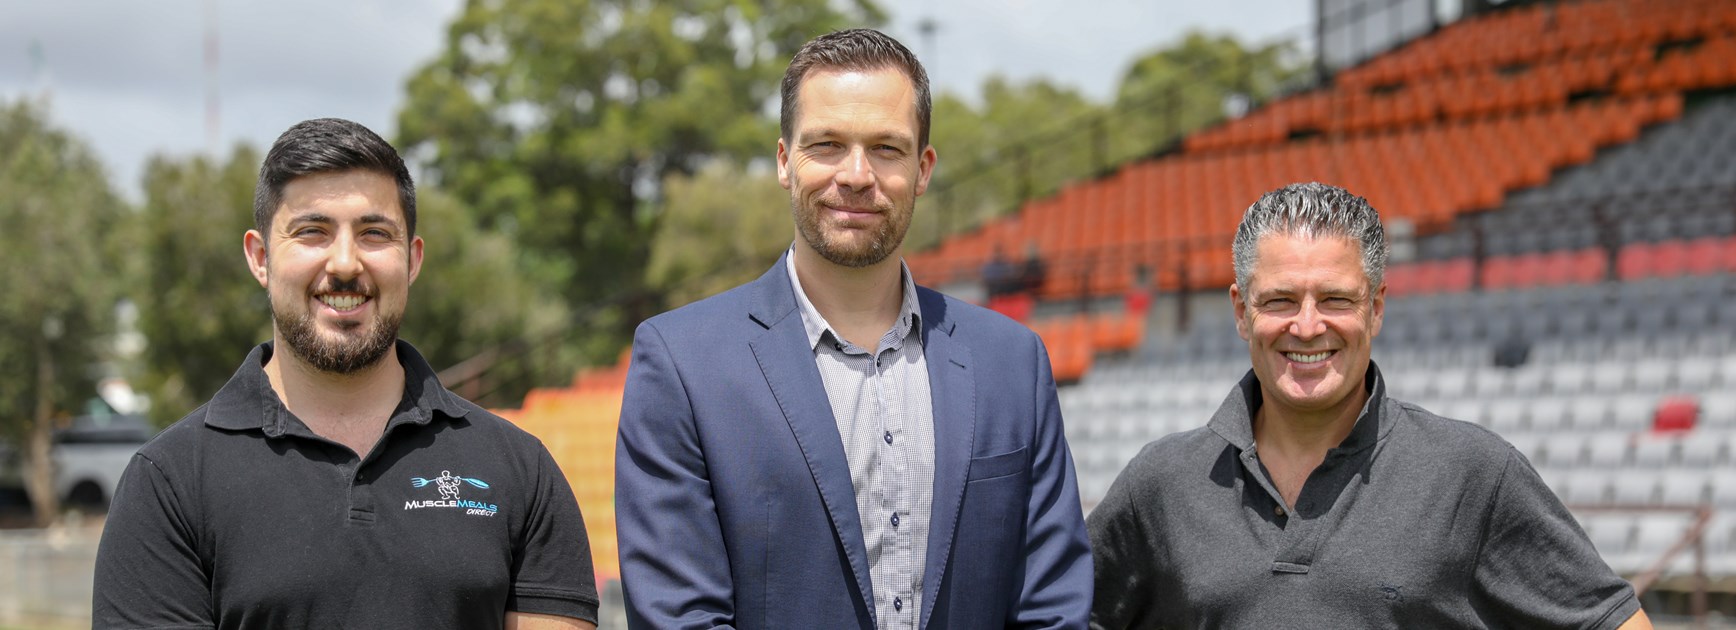 Muscle Meals Direct join Wests Tigers as Corporate Partner